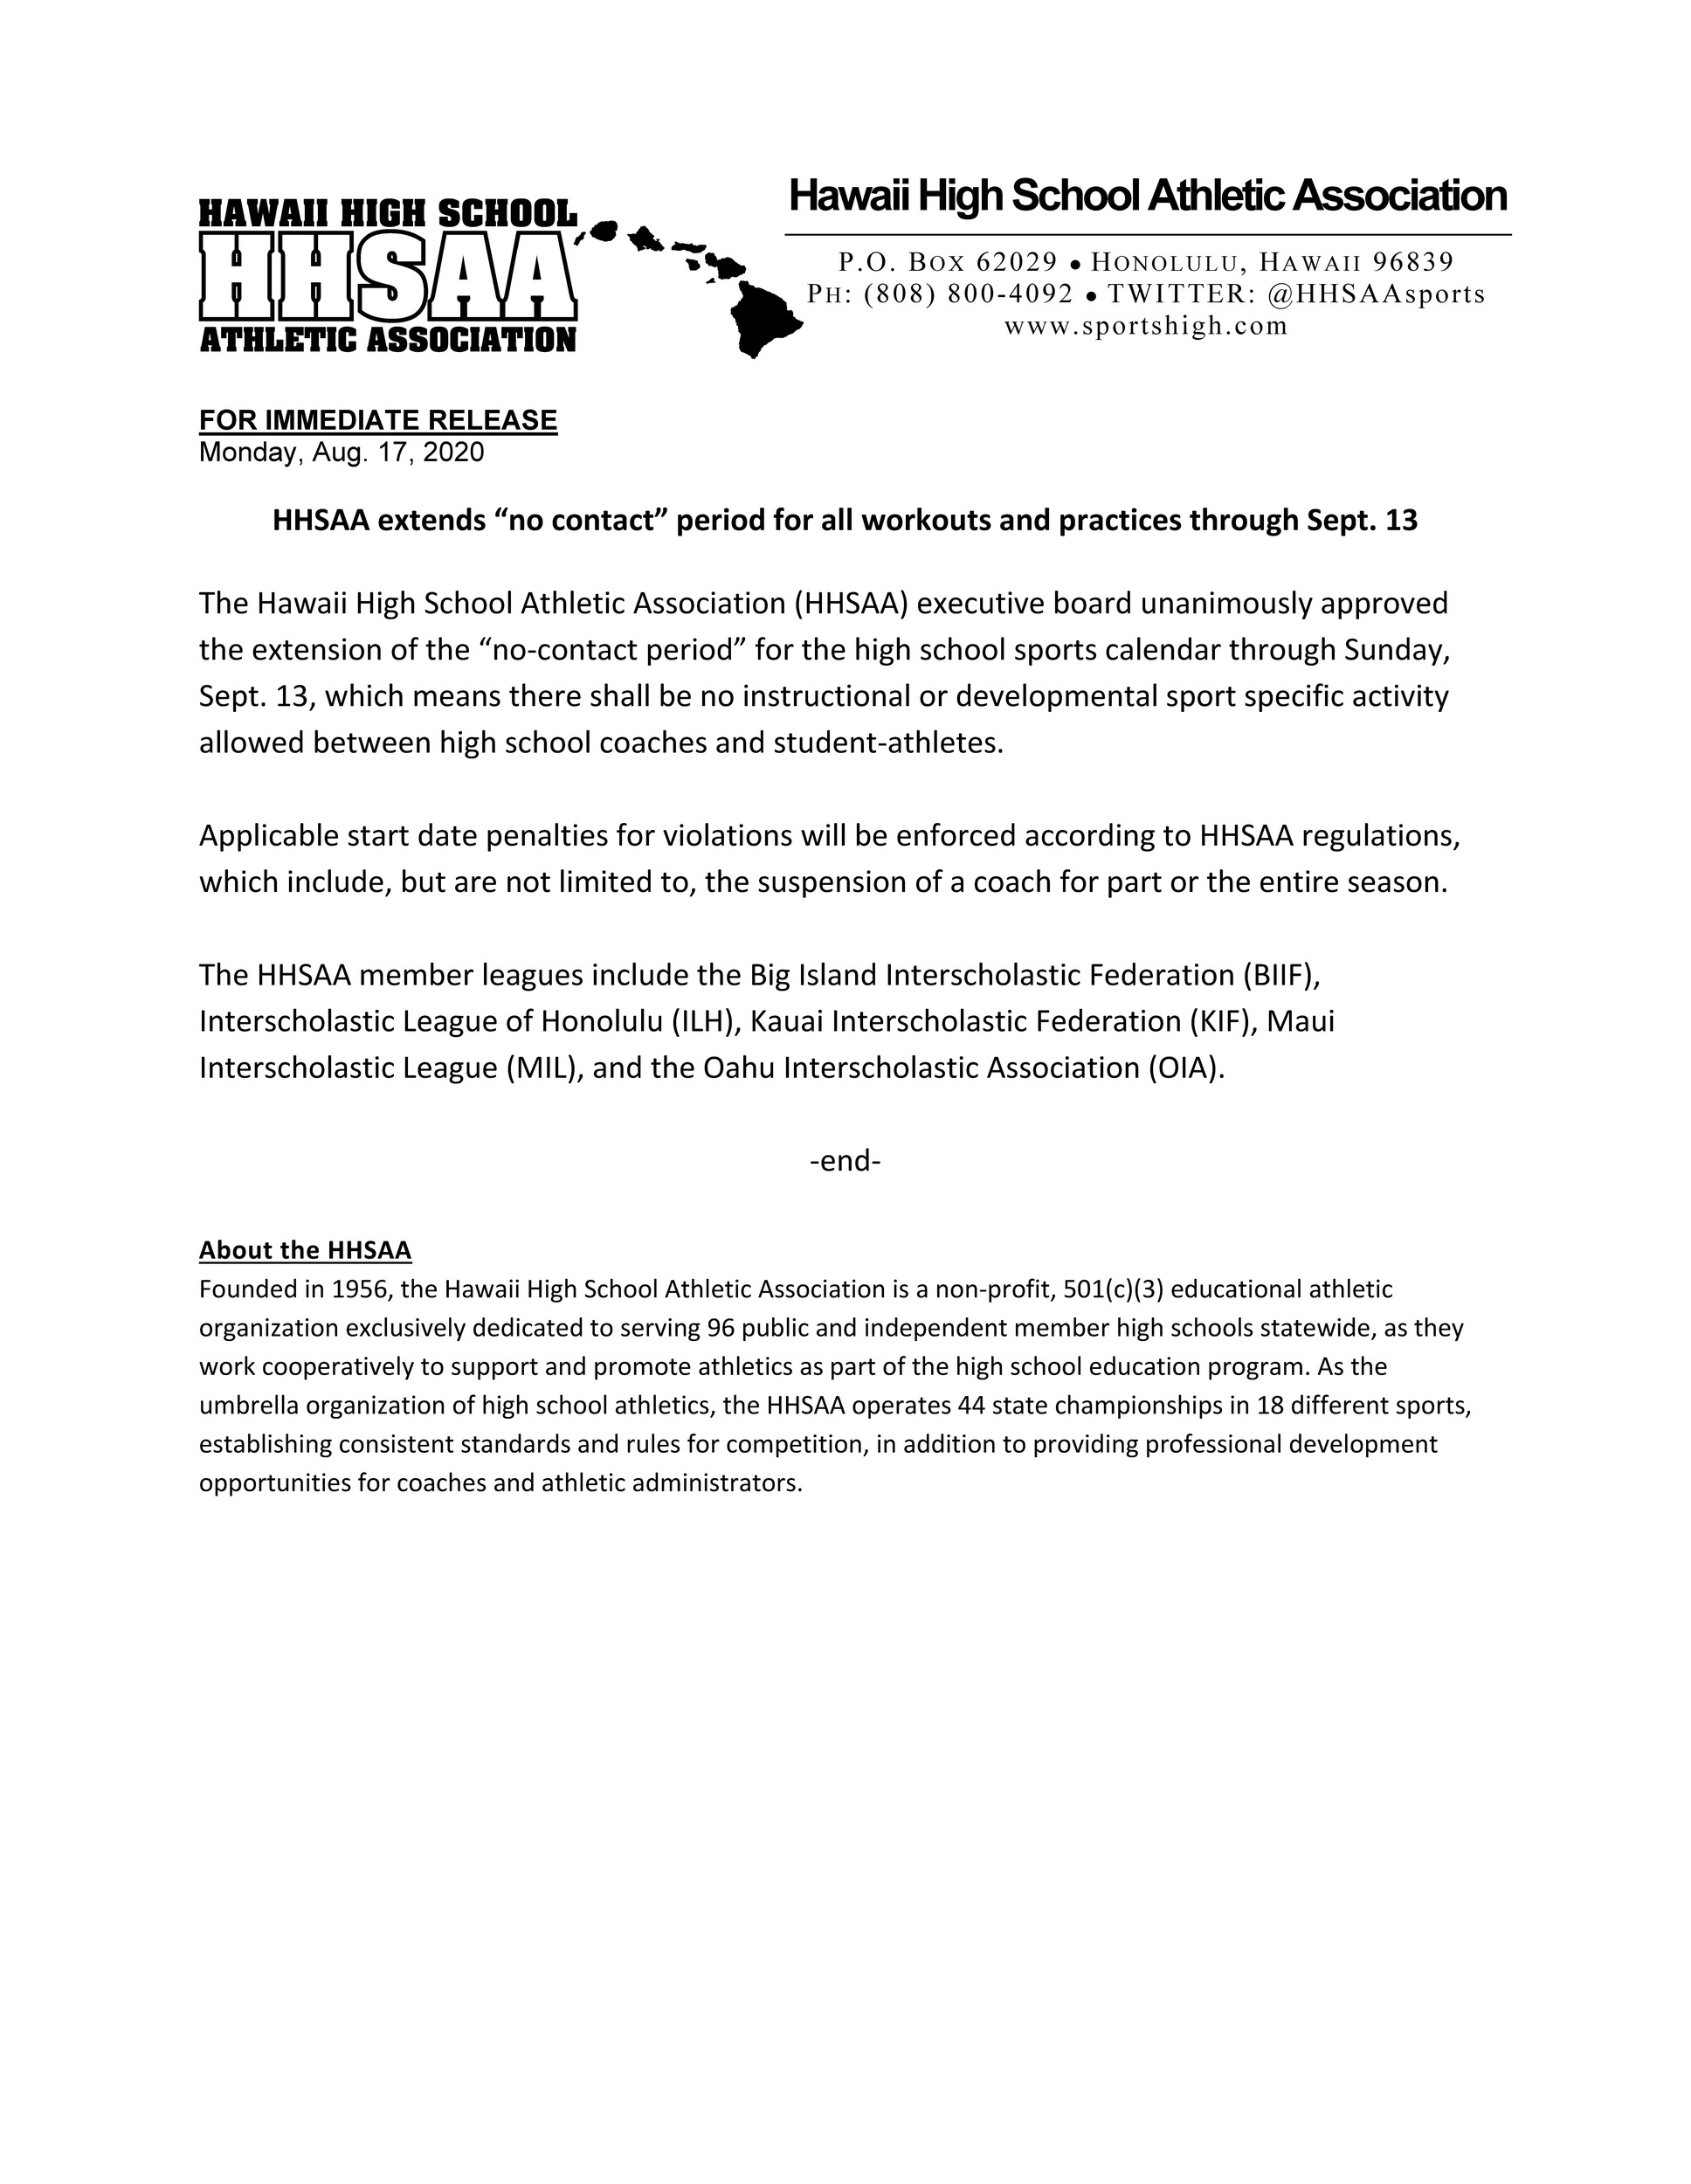 2020-08-17-press-release-hhsaa-extends-no-contact-dead-period-through-sept-13